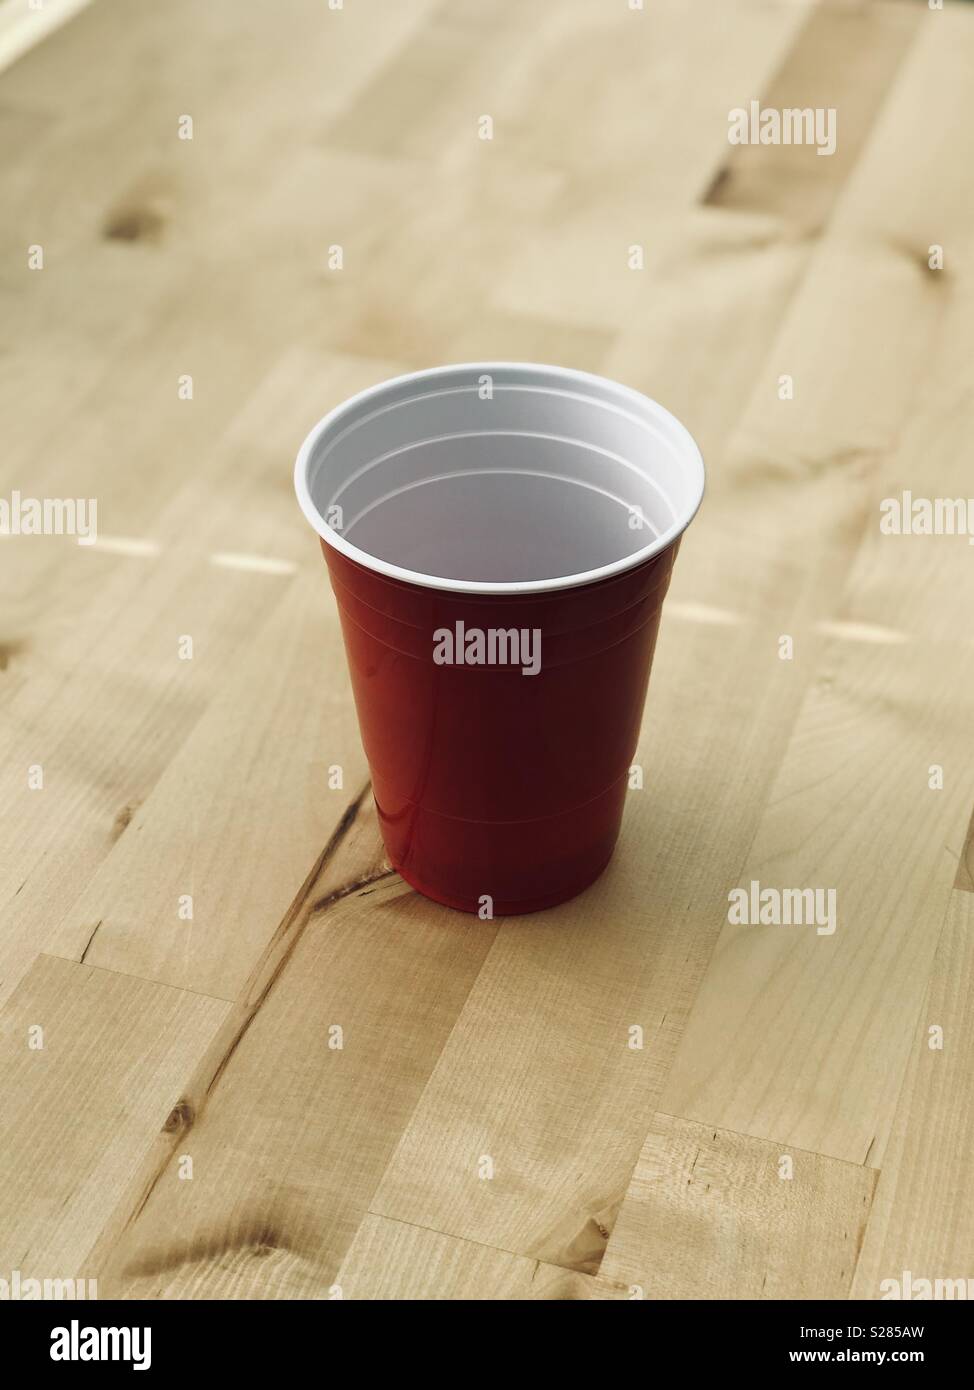 https://c8.alamy.com/comp/S285AW/red-solo-cup-S285AW.jpg